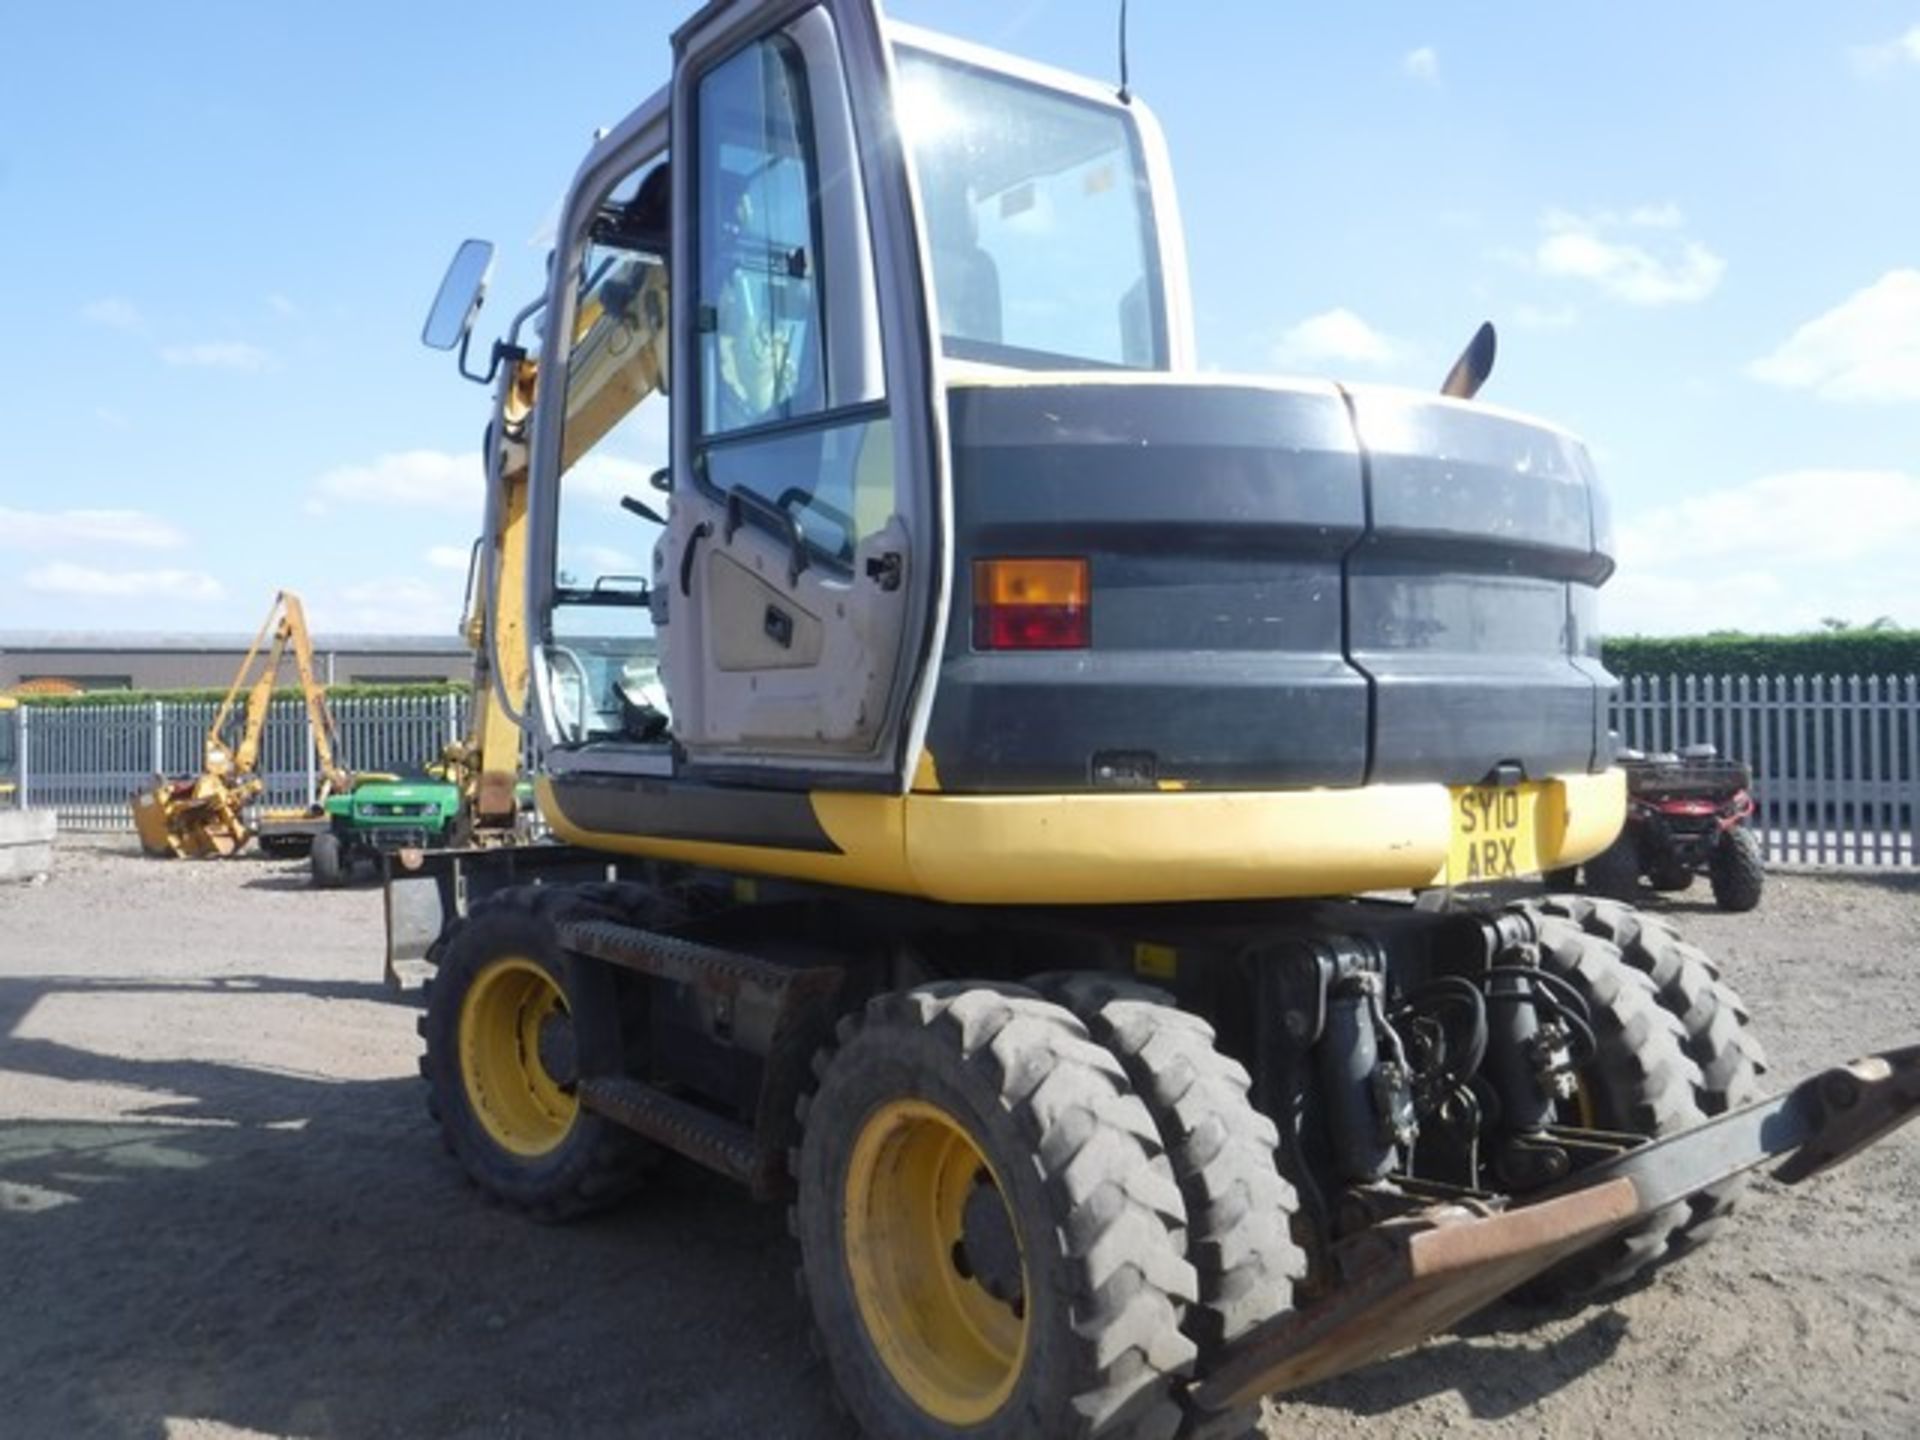 NEW HOLLAND 2008 10T WHEELED EXCAVATOR 12669HRS (NOT VERIFIED) C/W BLADE, HPW, HYDRAULIC QUICK HITC - Image 7 of 8